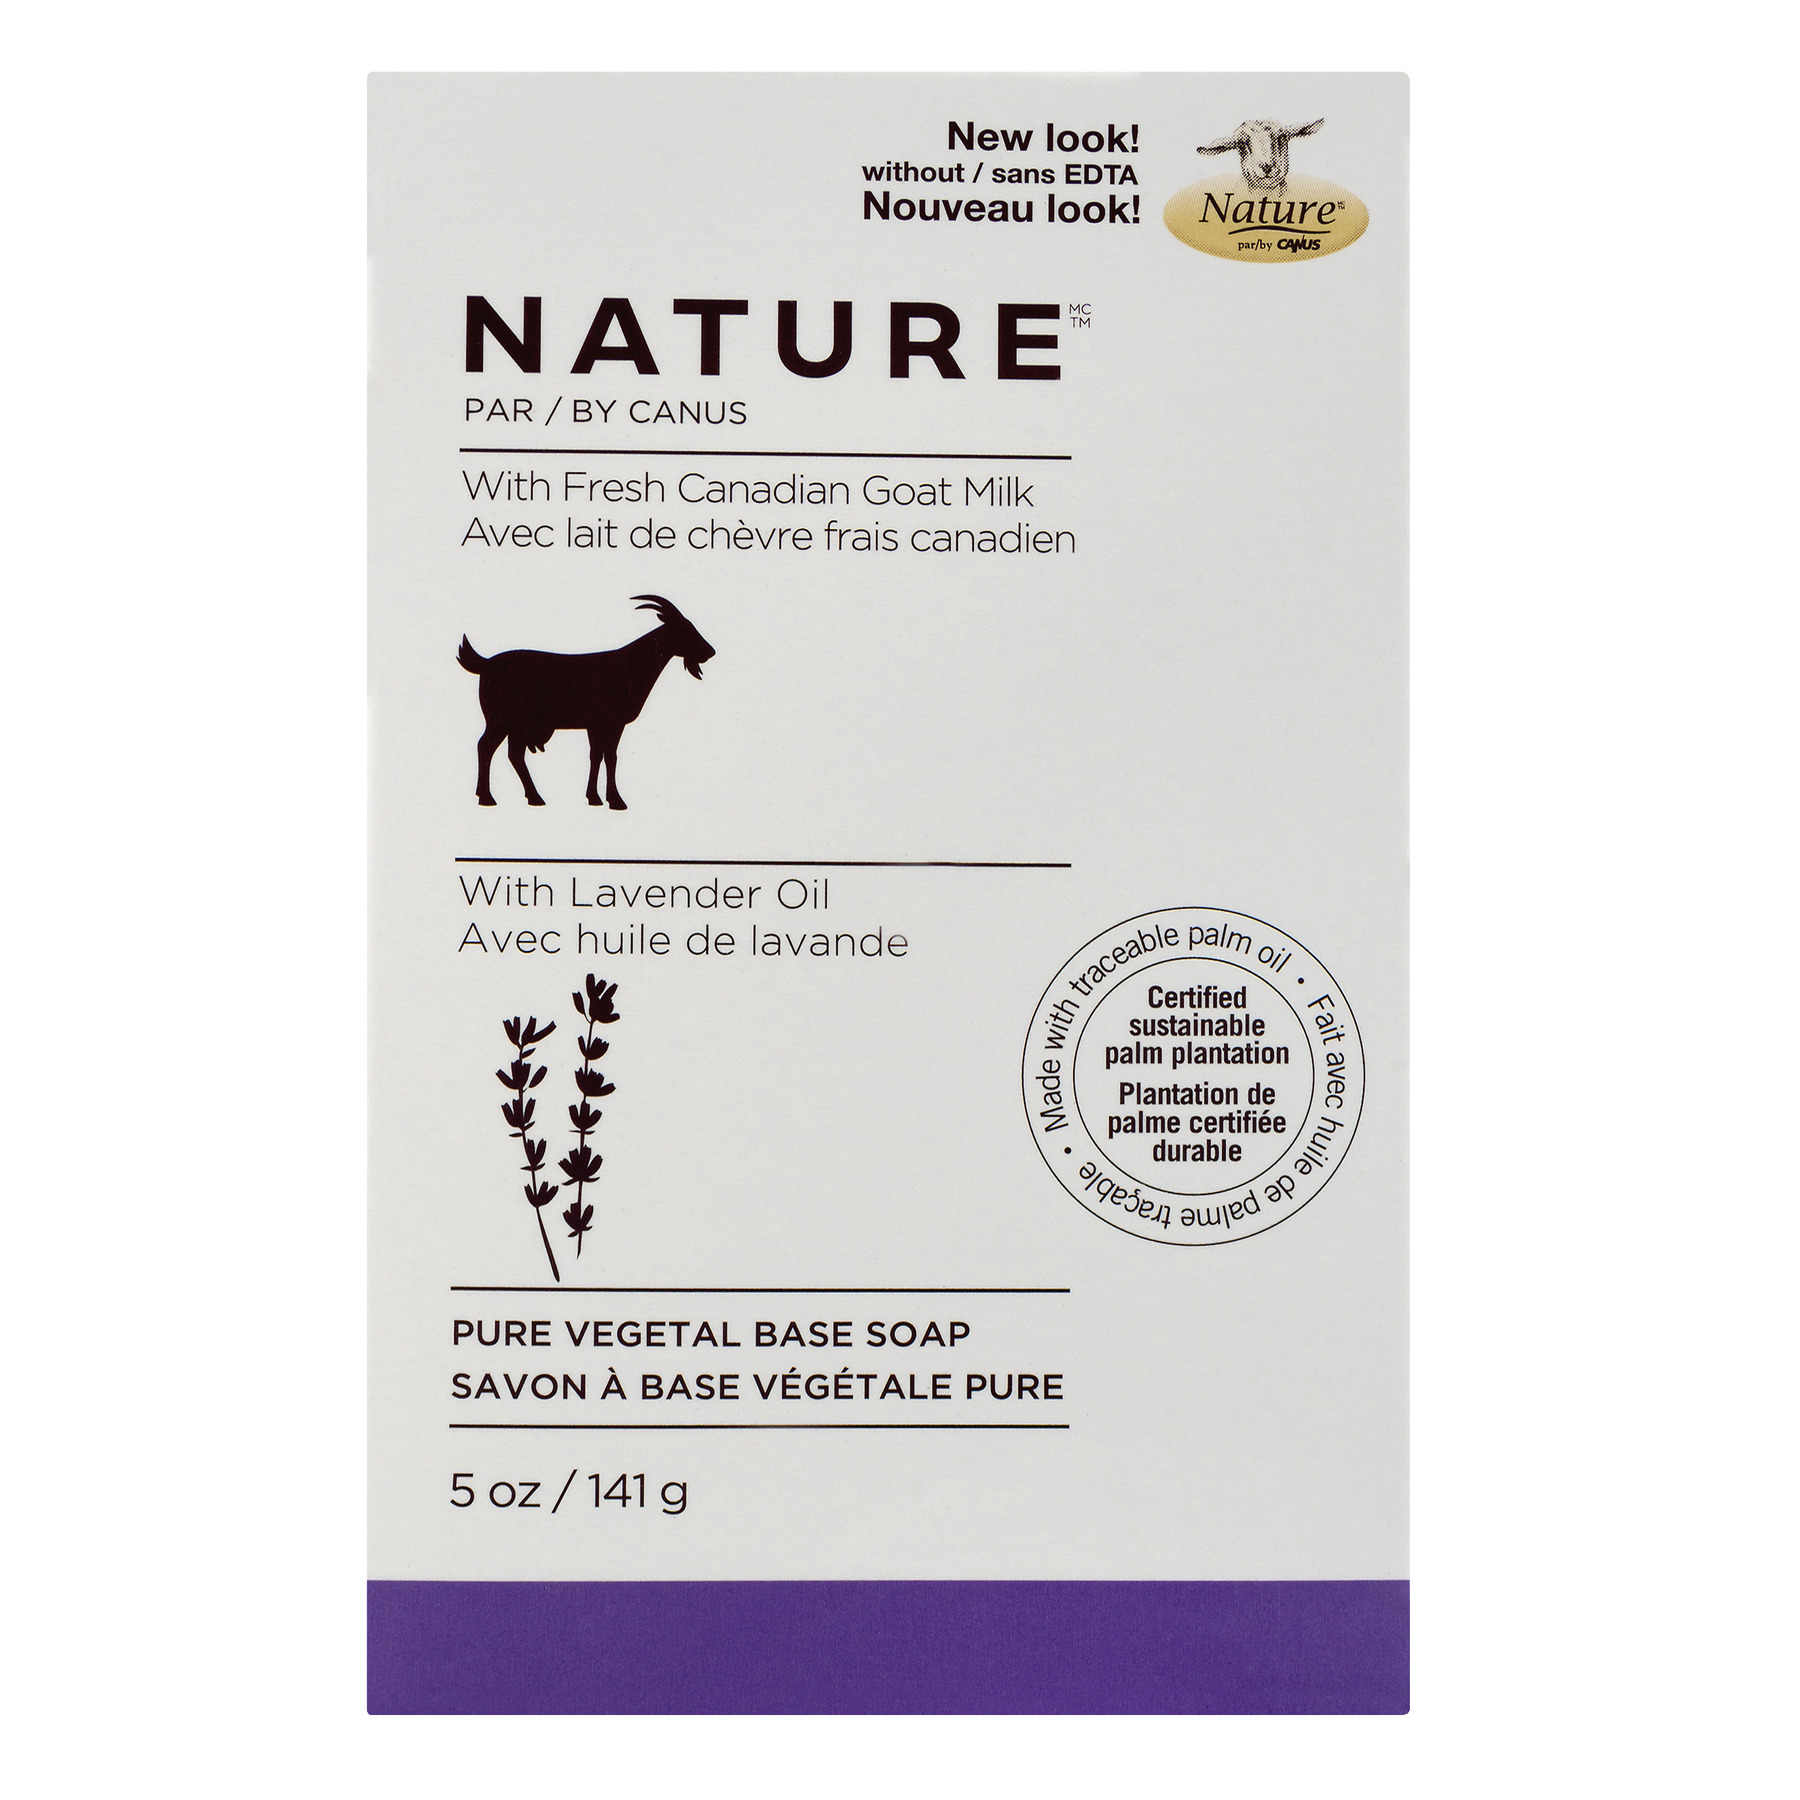 Nature Pure Vegetal Base Soap With Lavender Oil, 5.0 OZ Pack Of 1 - image 1 of 2